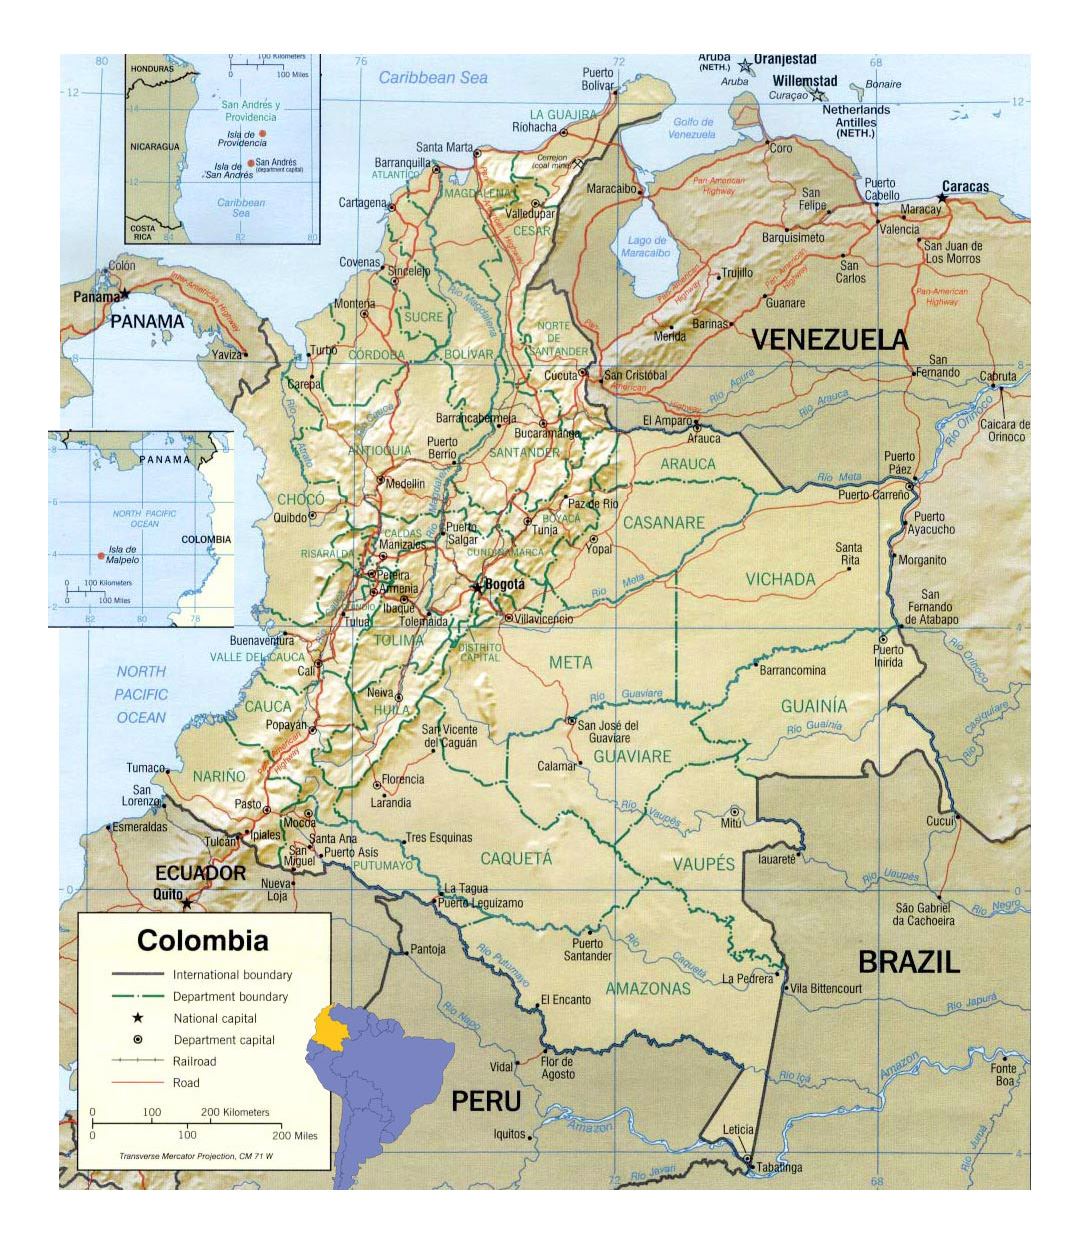 Detailed political and administrative map of Colombia with relief, roads and cities